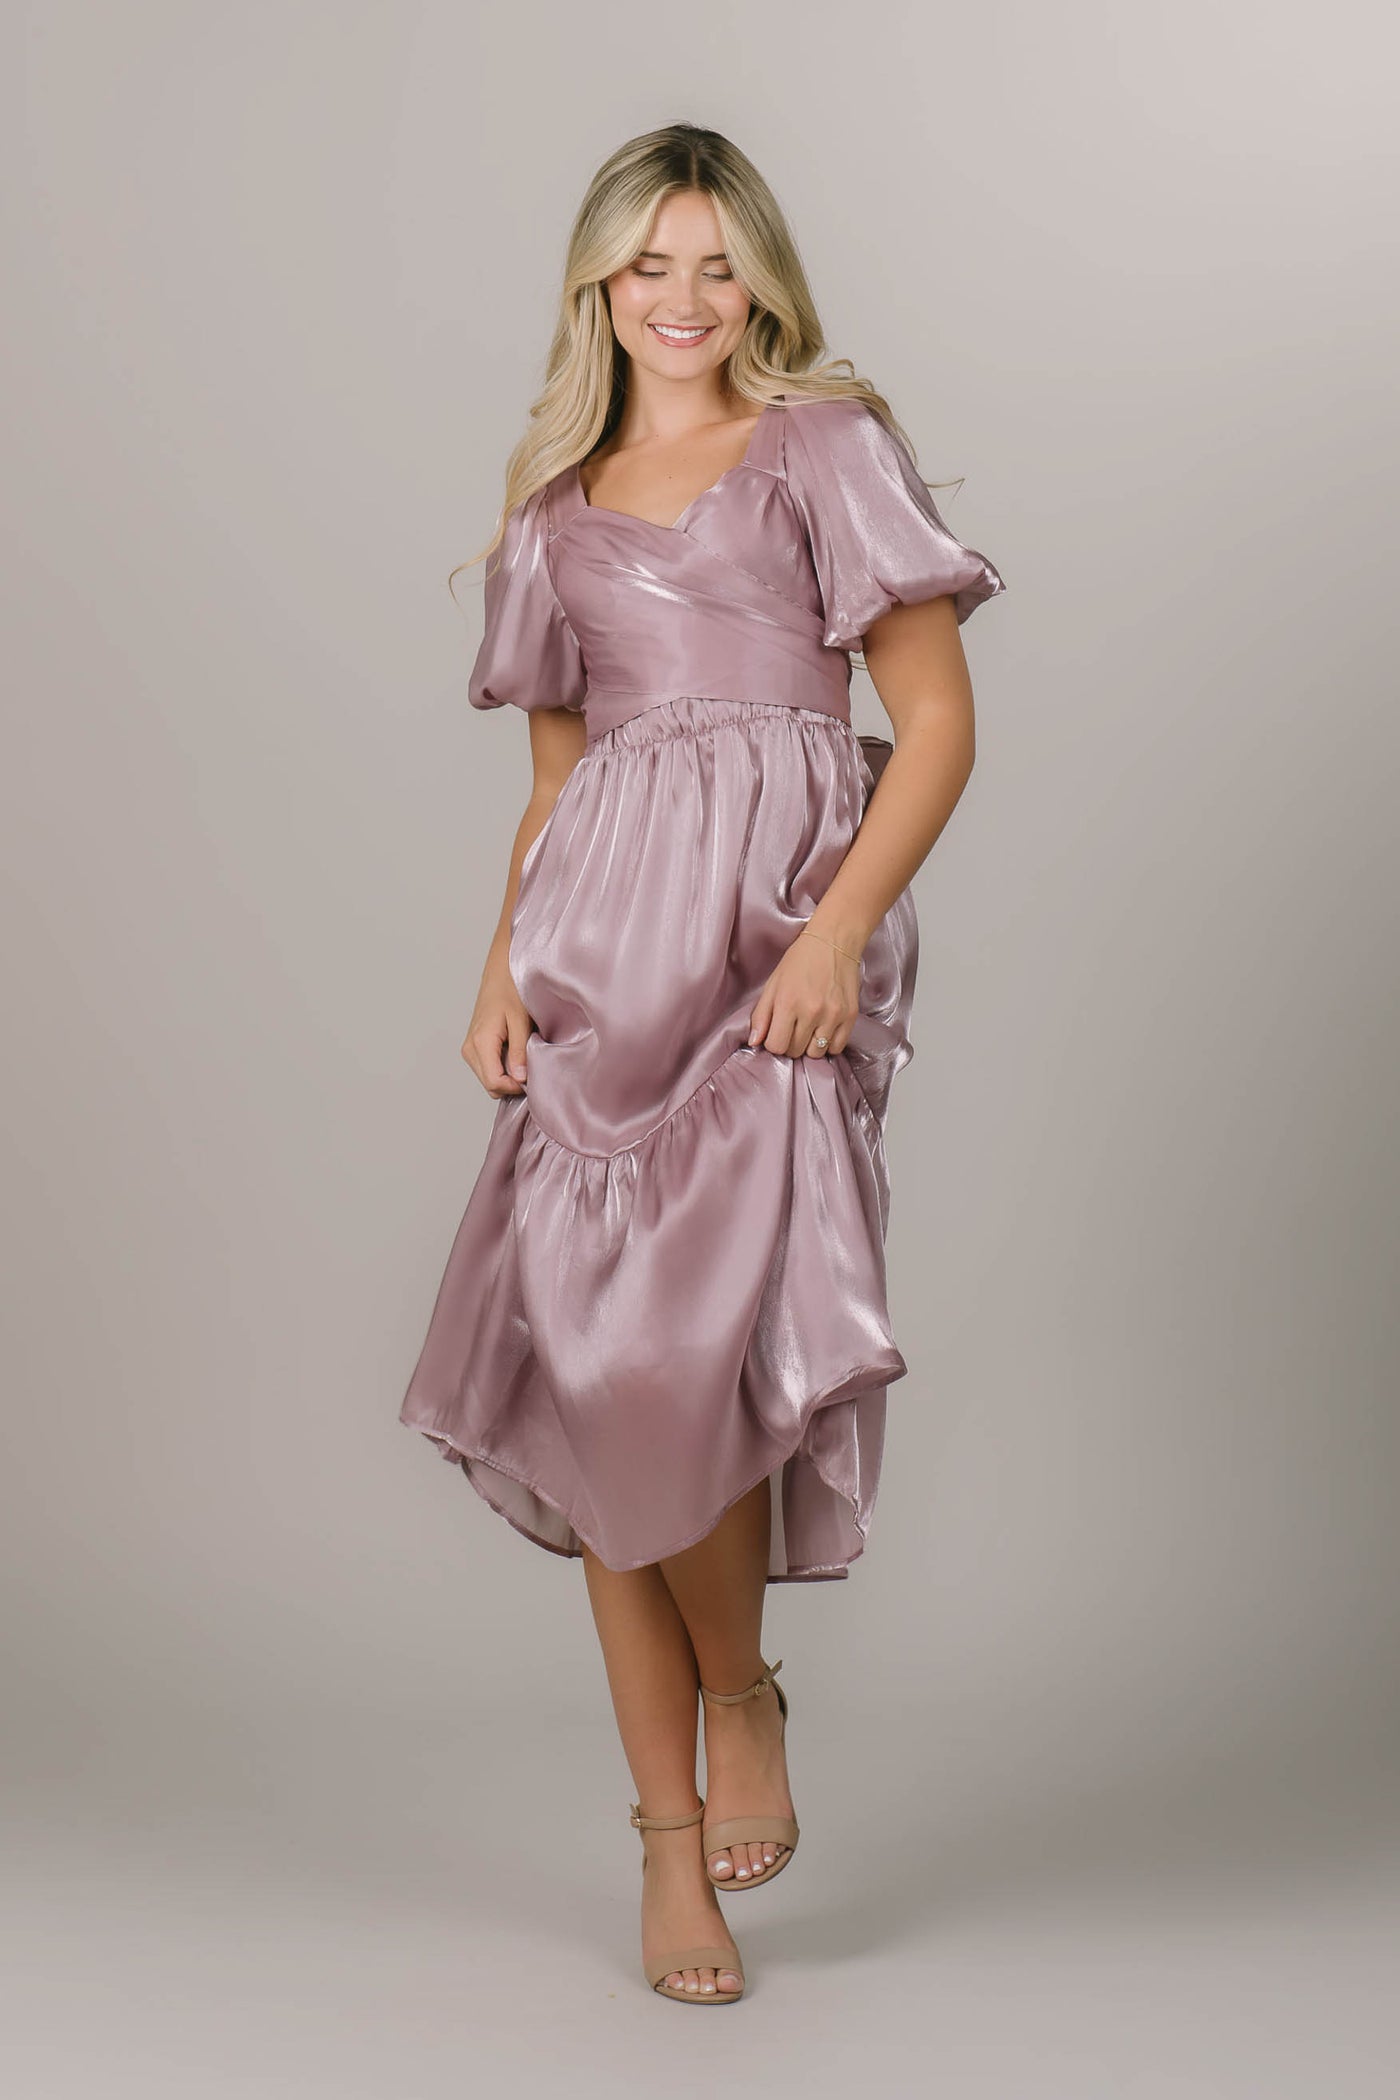 This is a modest bridesmaid dress with puff sleeves and a midi length skirt.